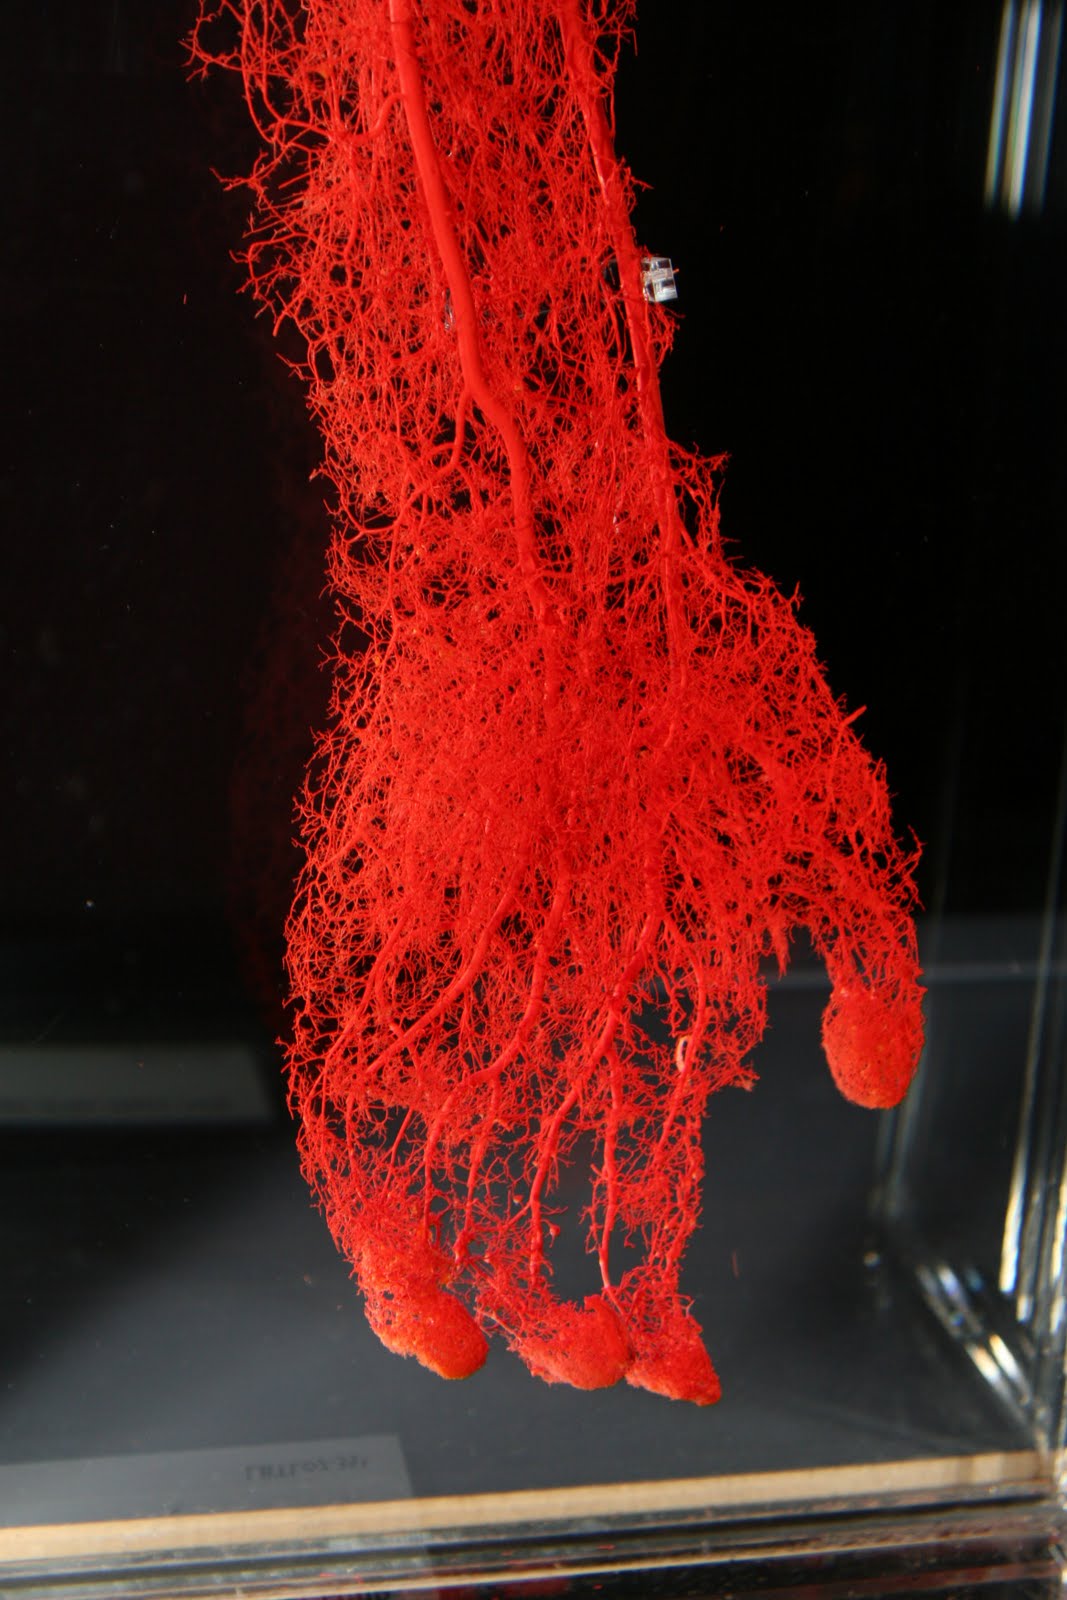 The blood vessels of a hand.